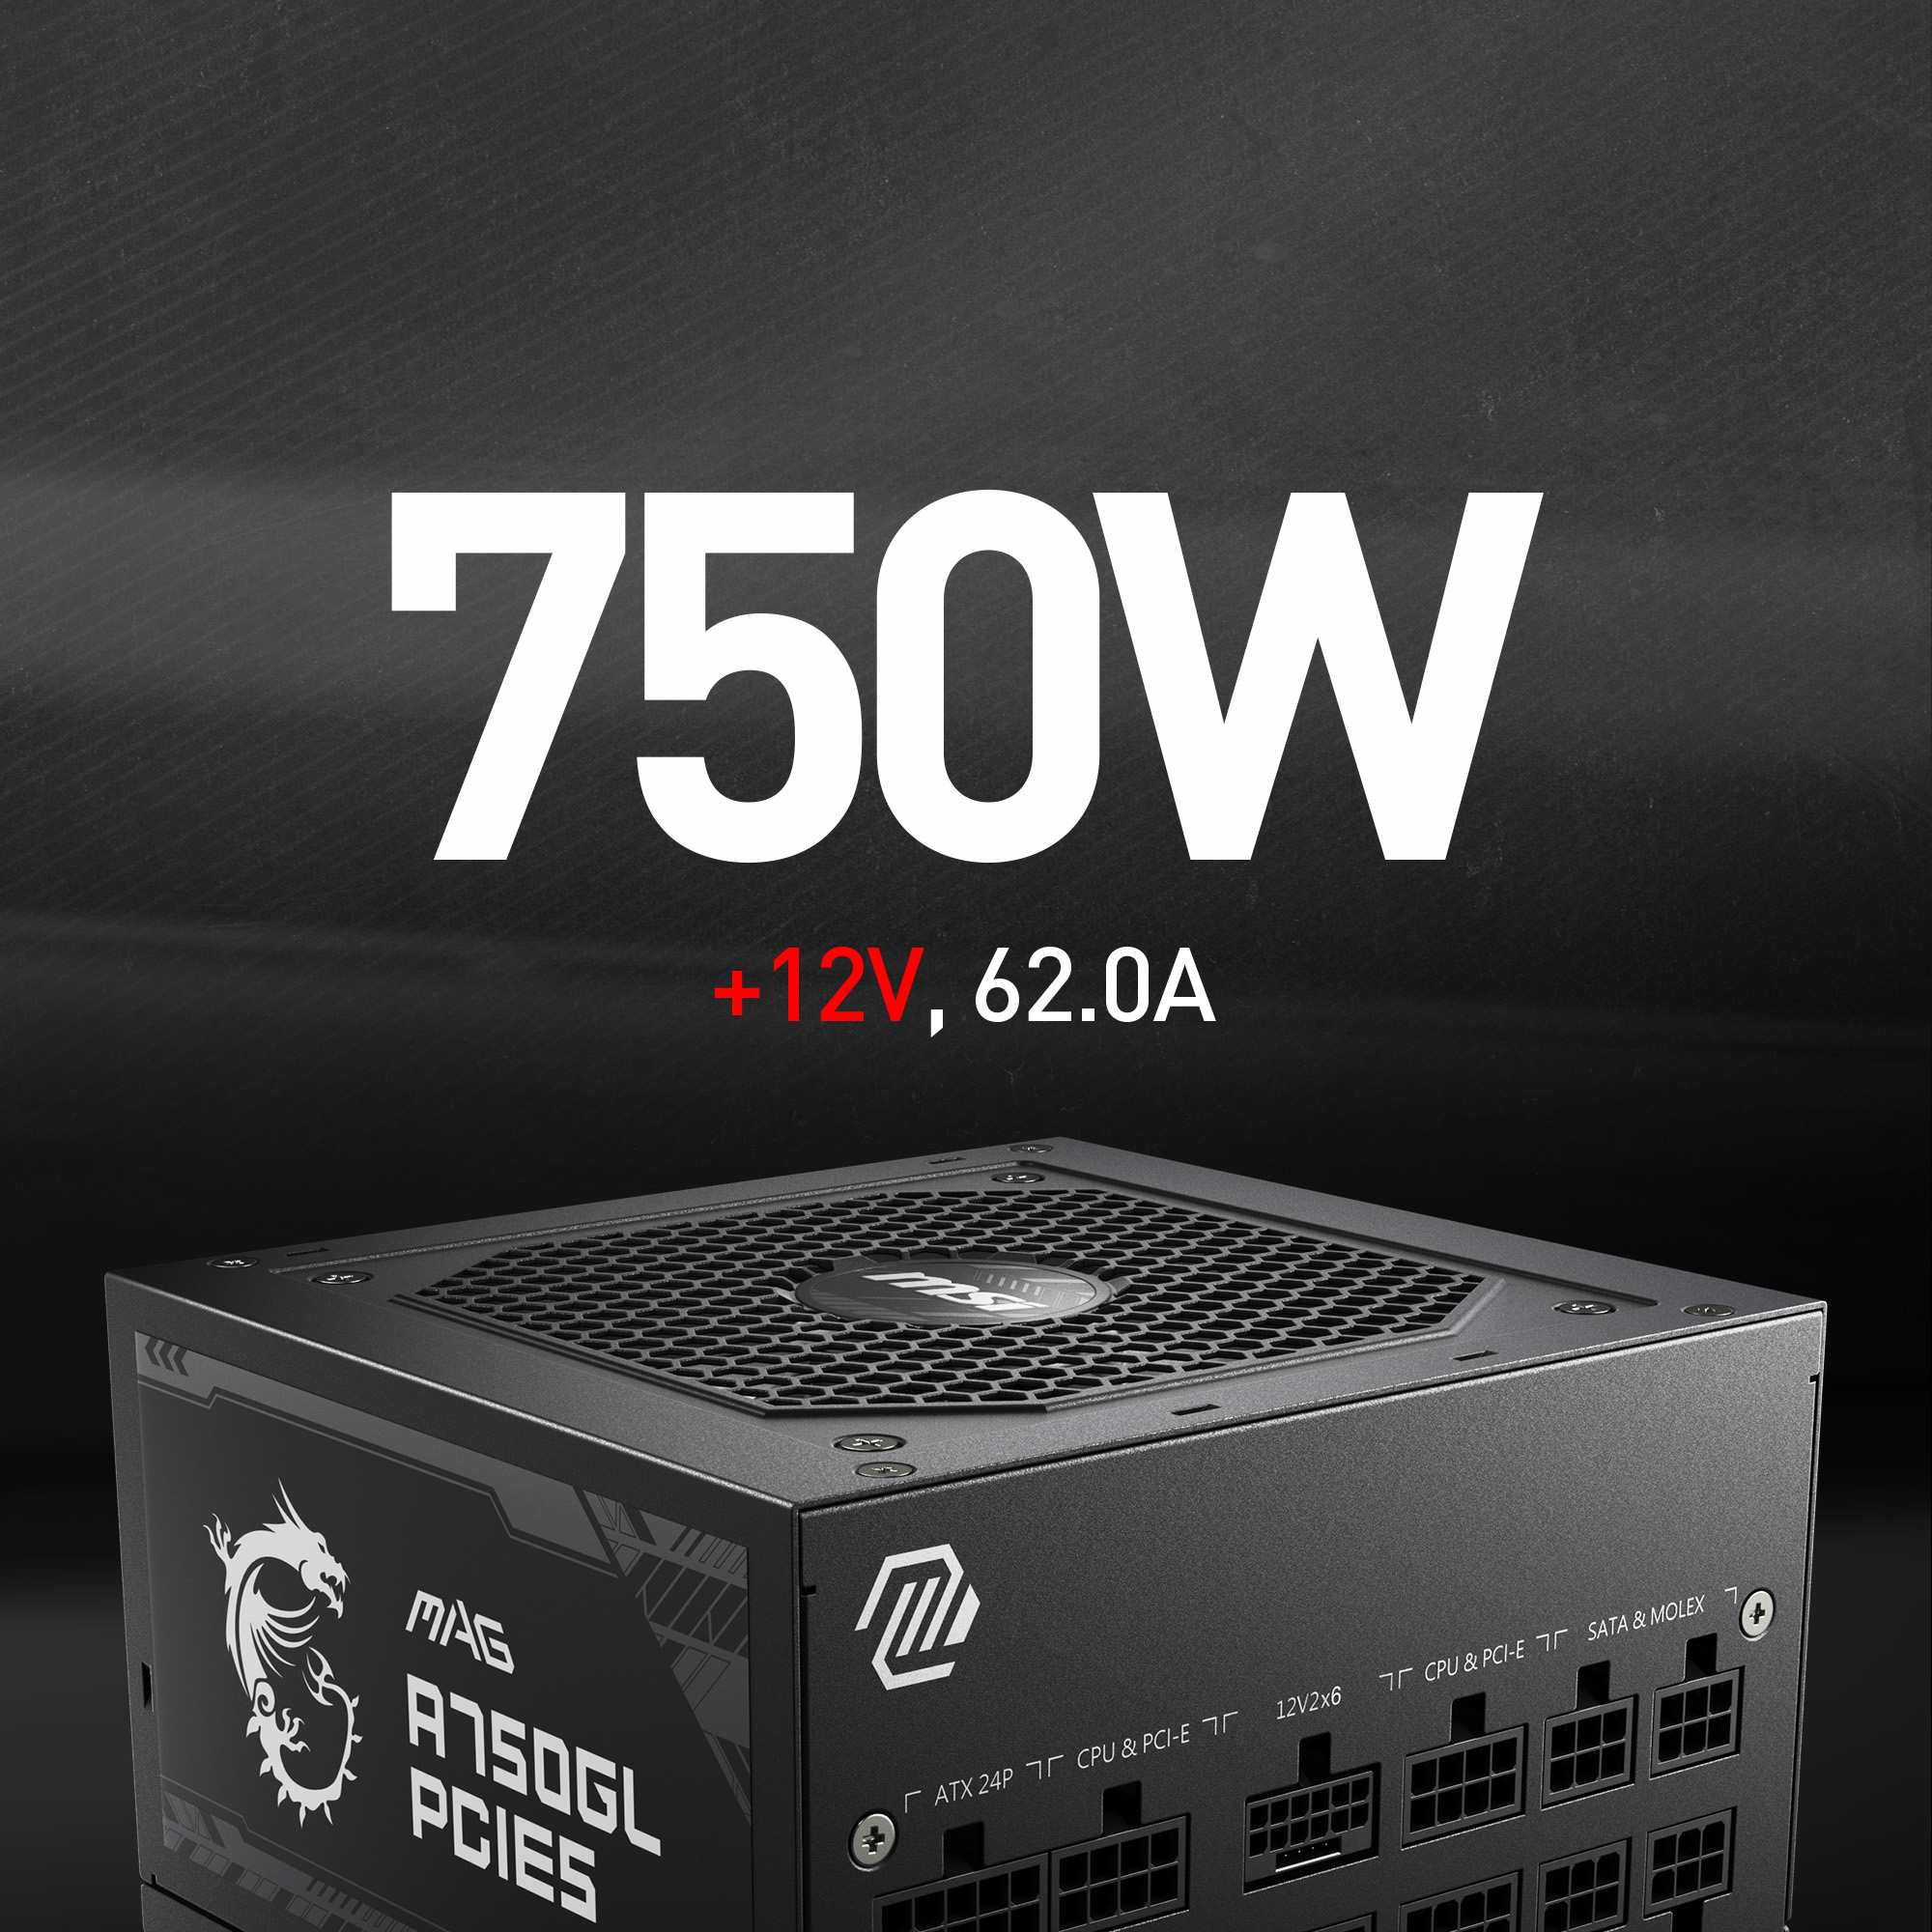 MSI - MAG A750GL PCIE 5.0, 80 GOLD Fully Modular Gaming PSU, 12VHPWR Cable,  ATX 3.0 Compatible, 750W Power Supply